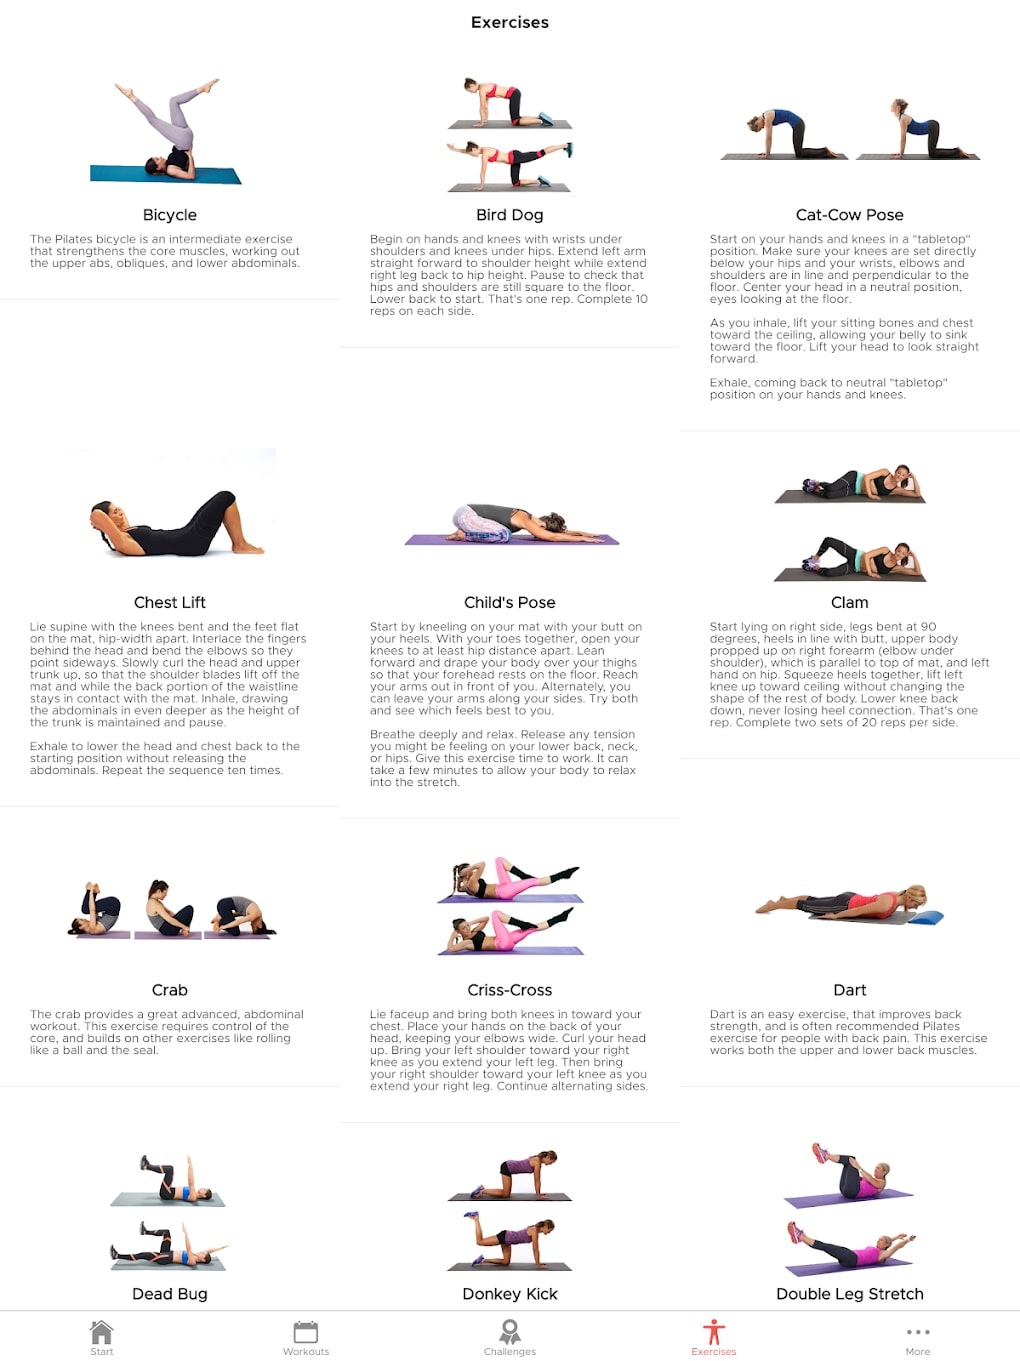 30 Day Pilates Challenge for Android - Download